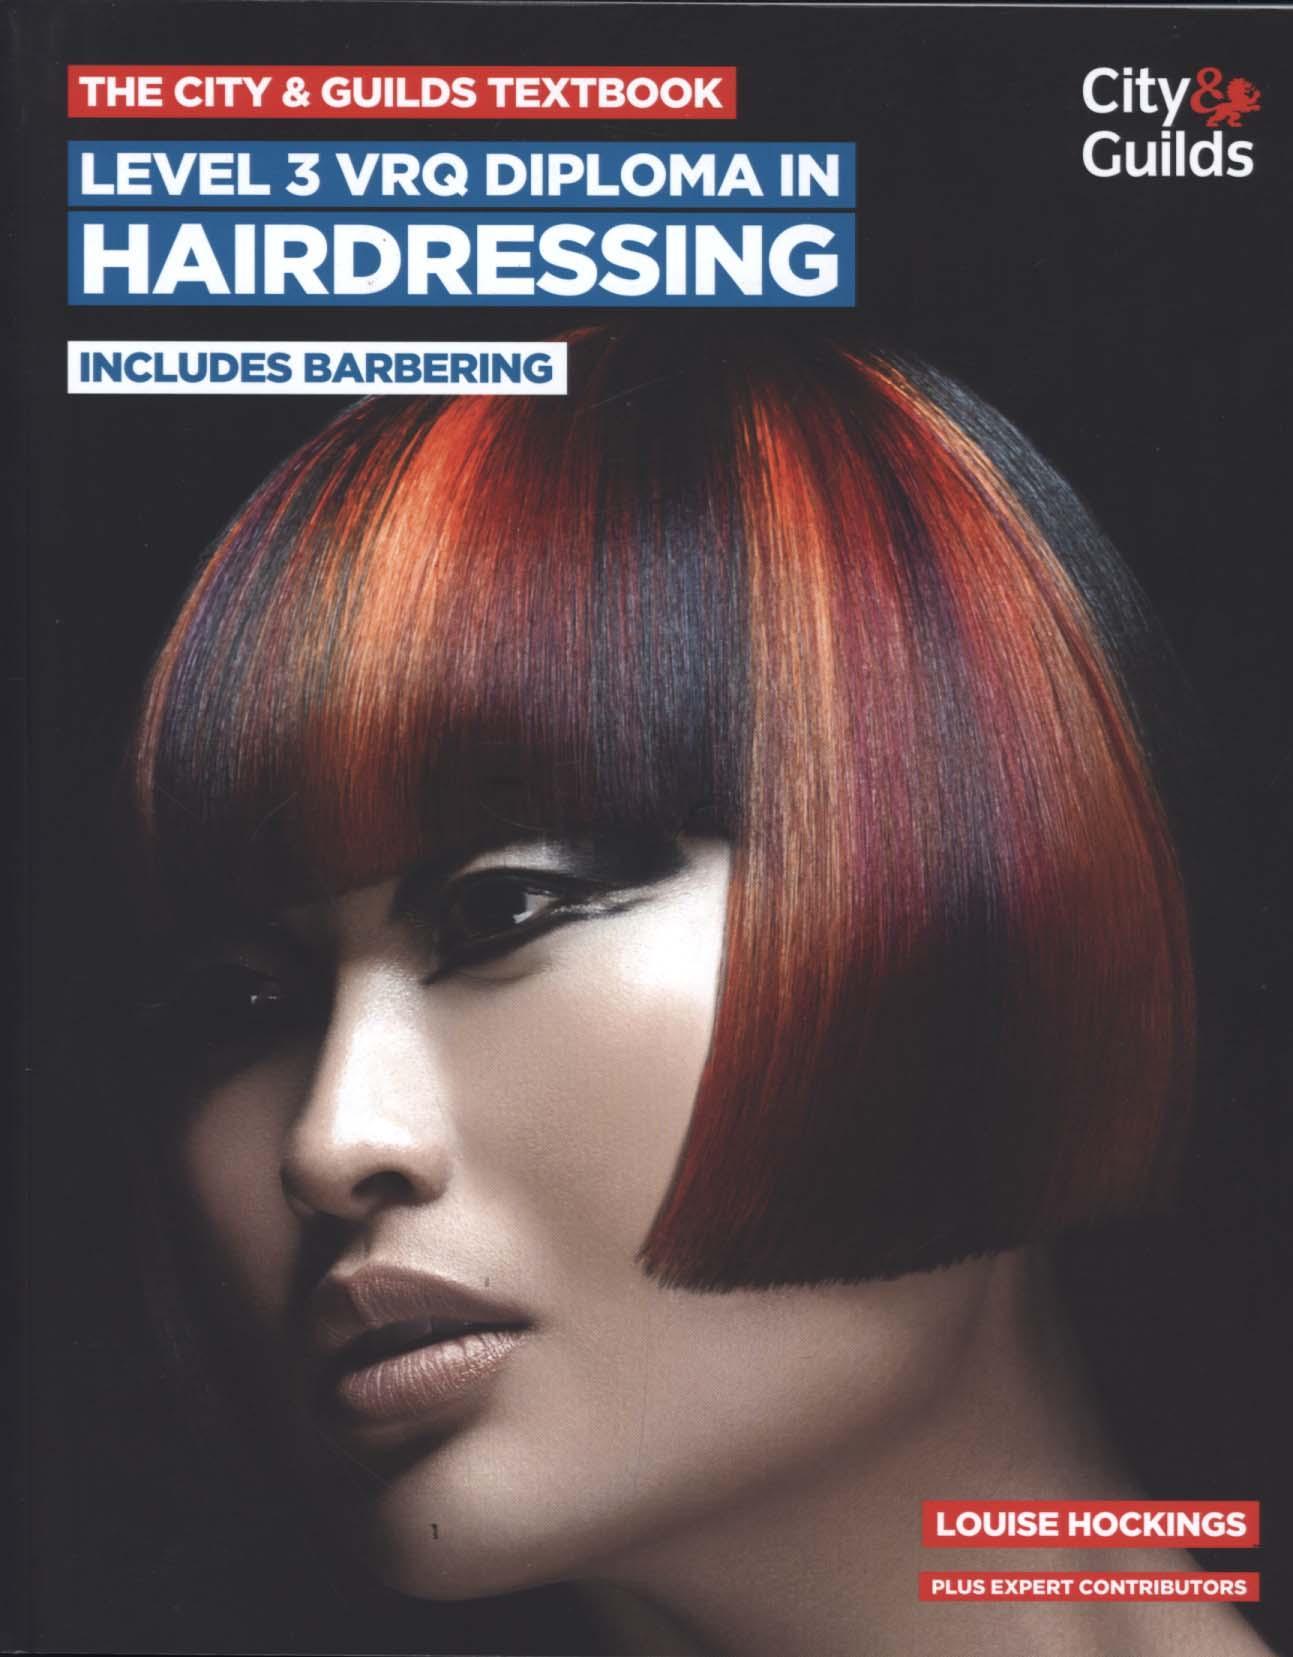 City & Guilds Textbook: Level 3 VRQ Diploma in Hairdressing